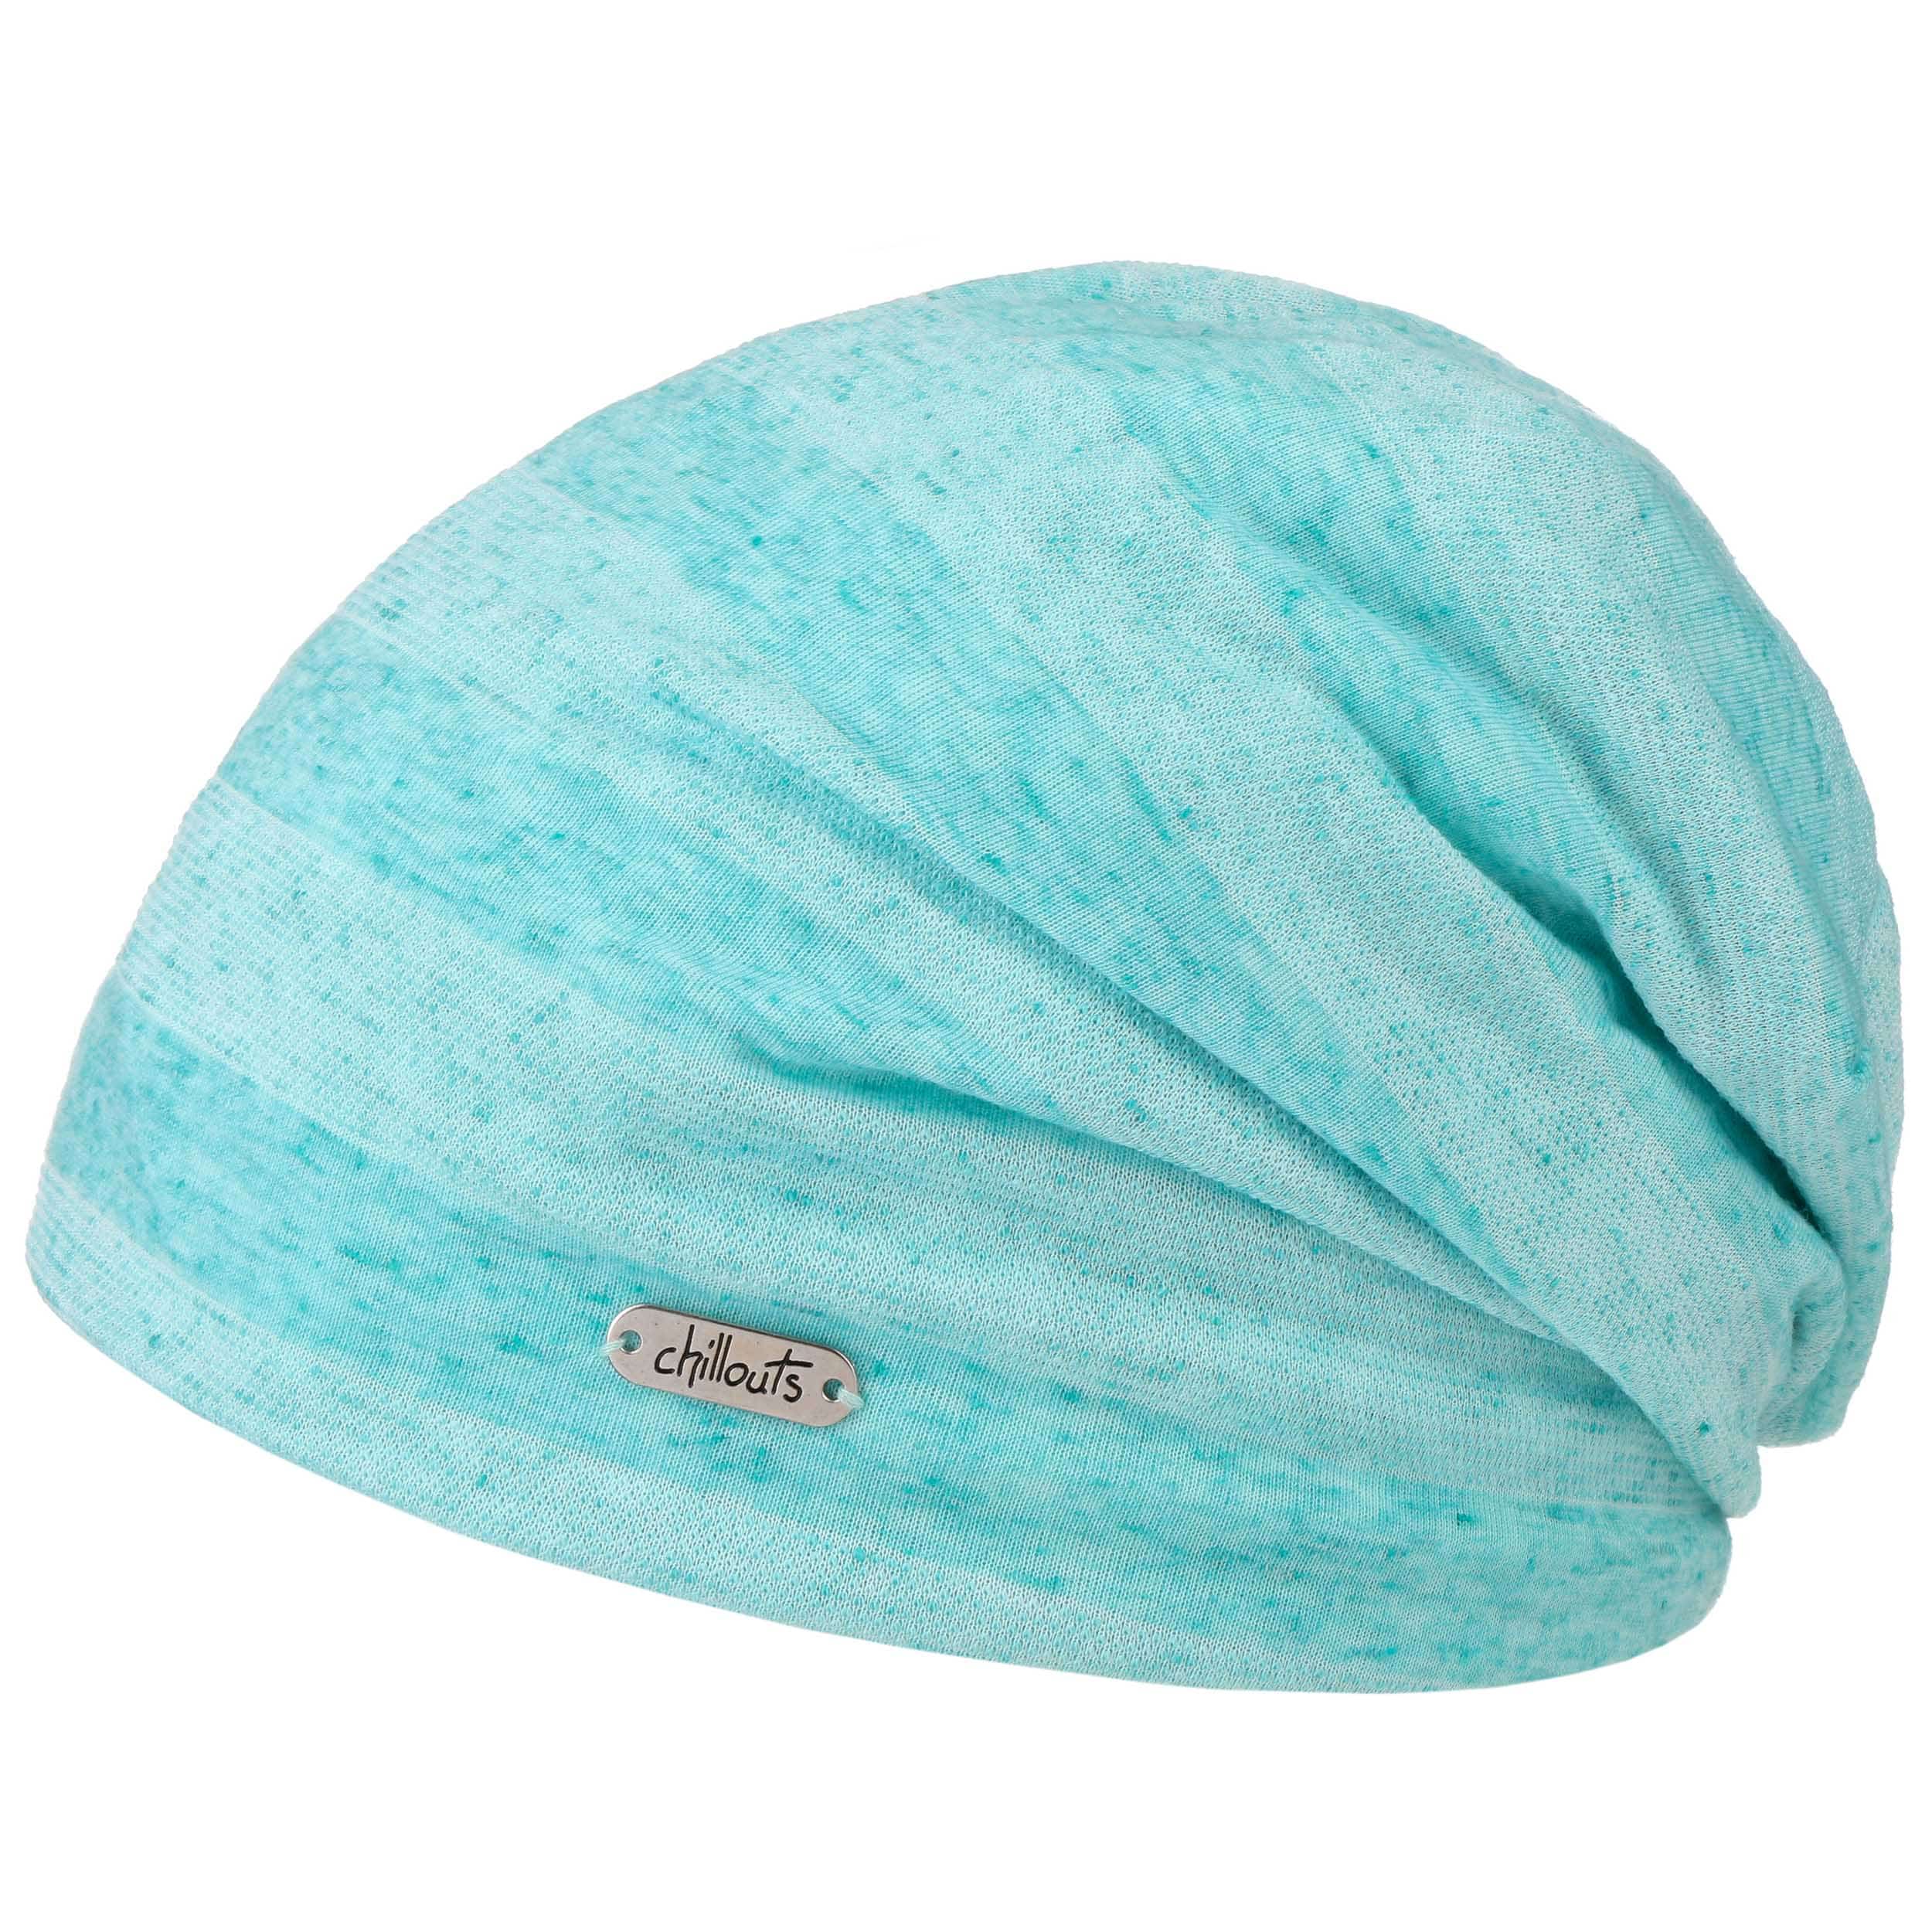 Stripes Beanie with Hemp by Chillouts - 18,95